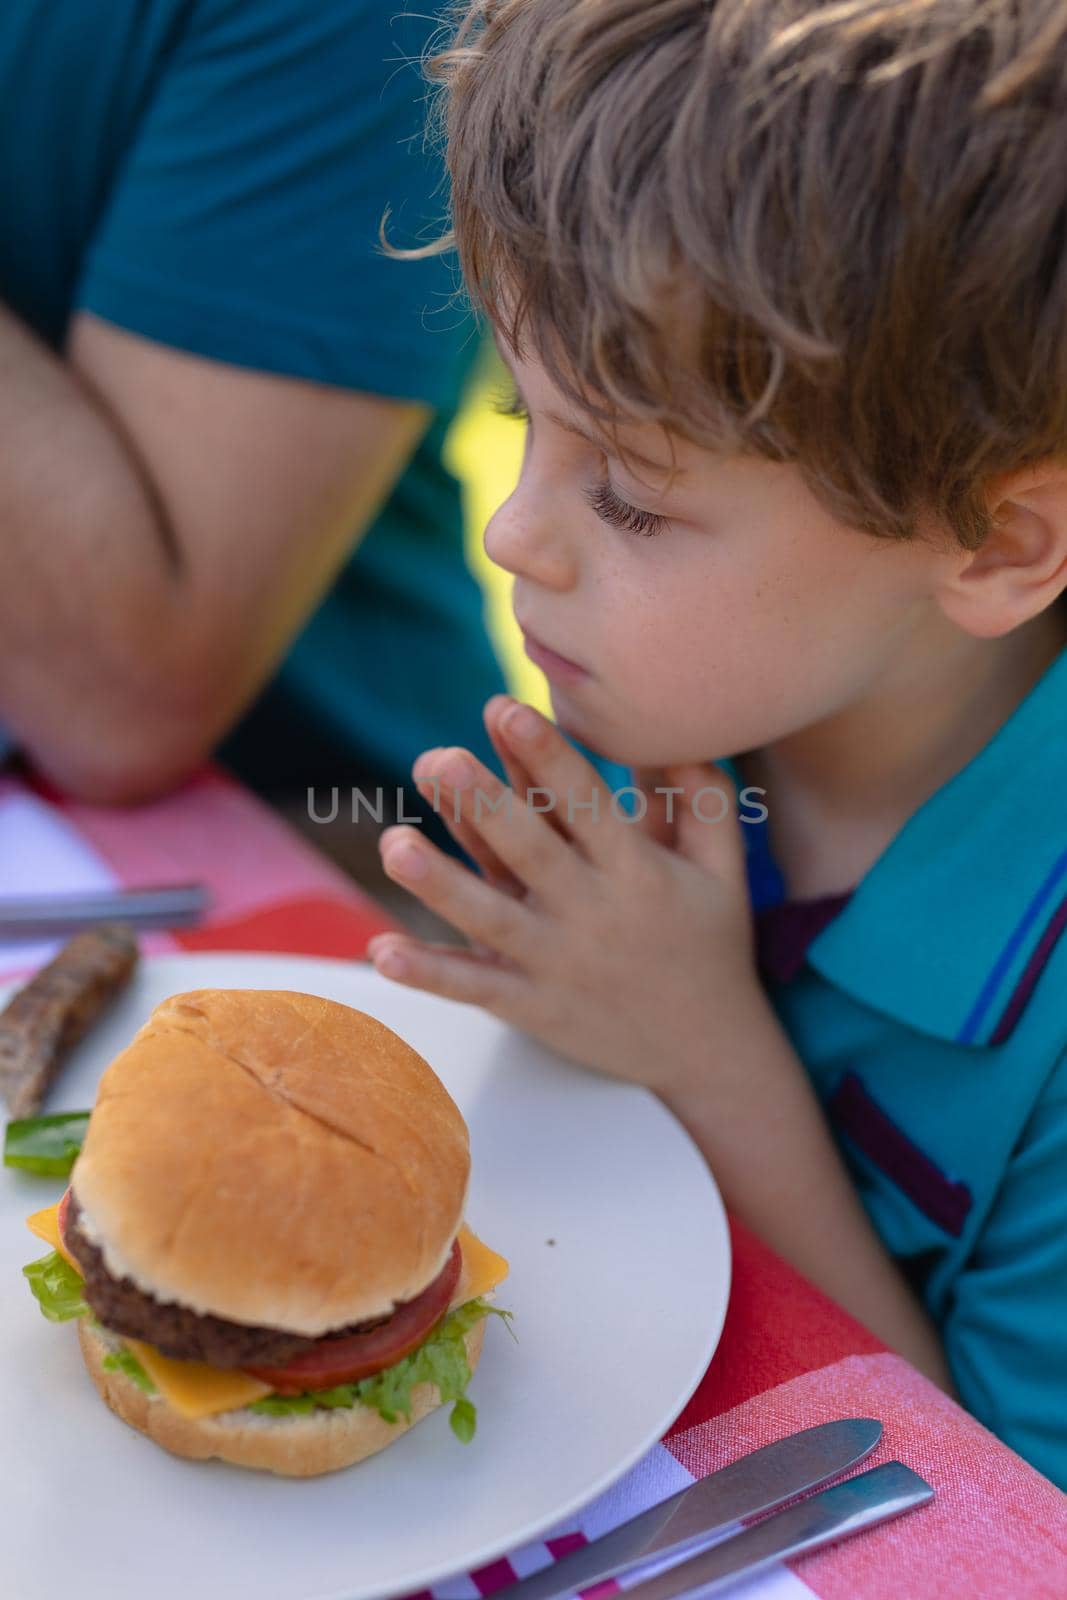 Caucasian boy with hands clasped and eyes closed praying by burger on table in garden. people, food and spirituality concept, unaltered.